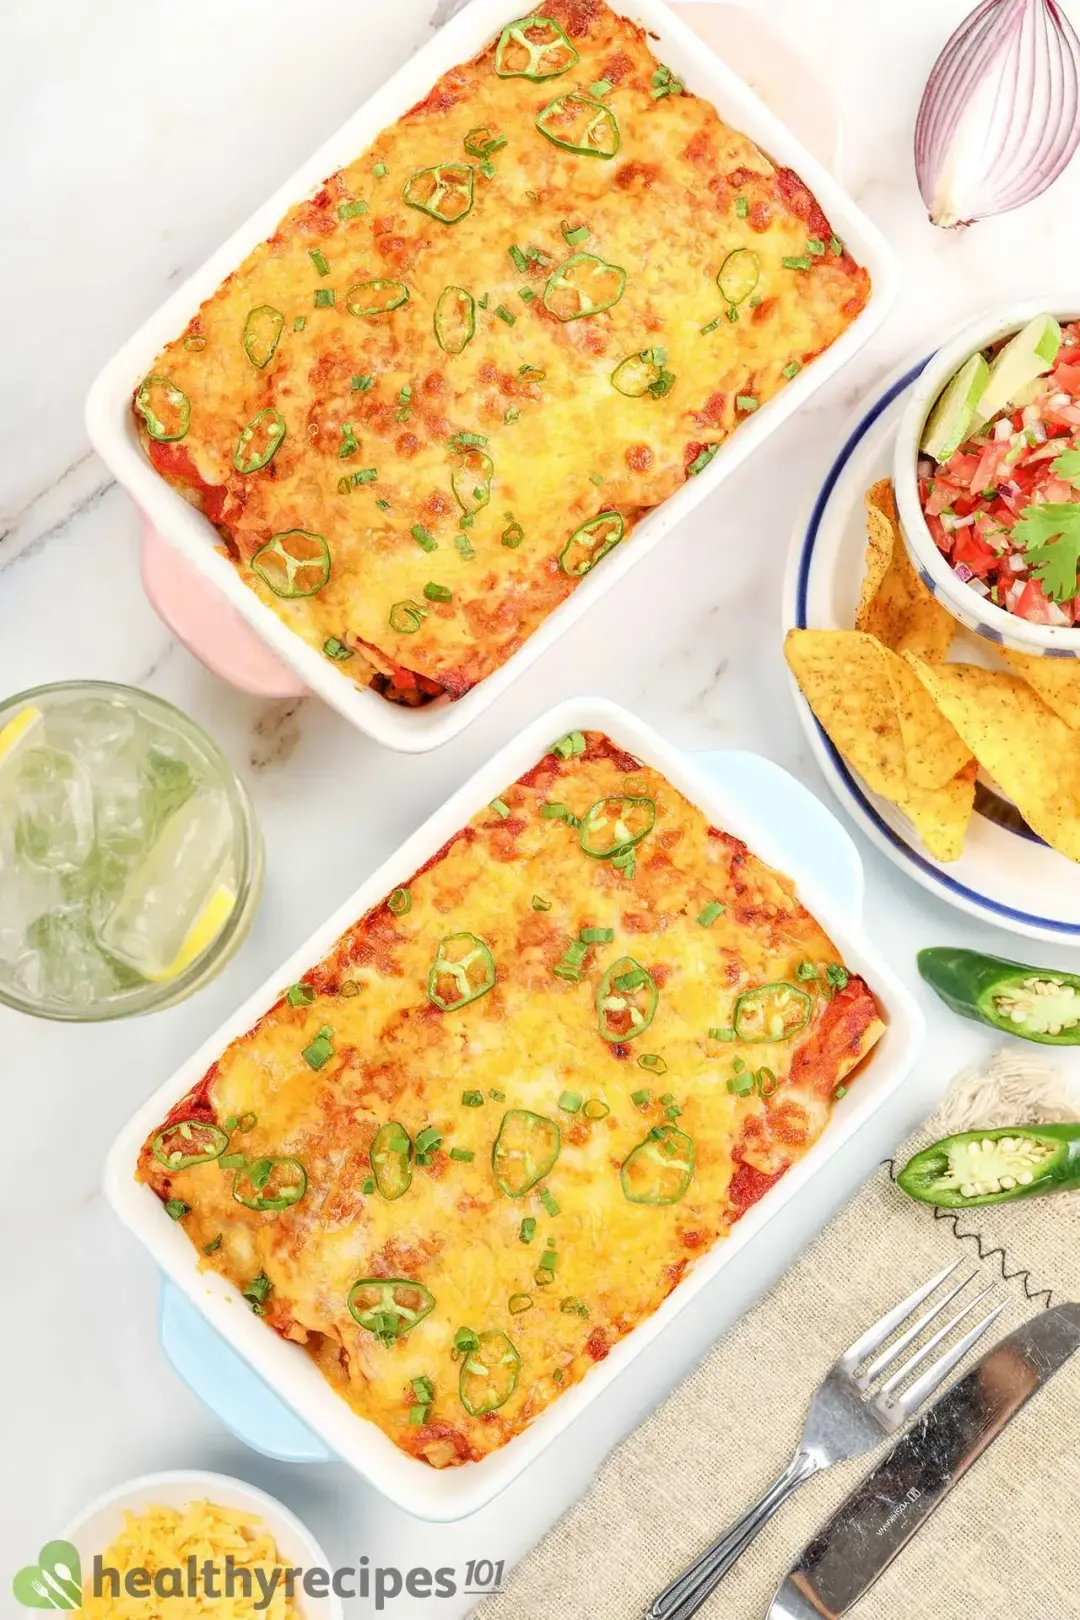 what else can you put enchiladas clb0ikabe001f381bgk2p611w